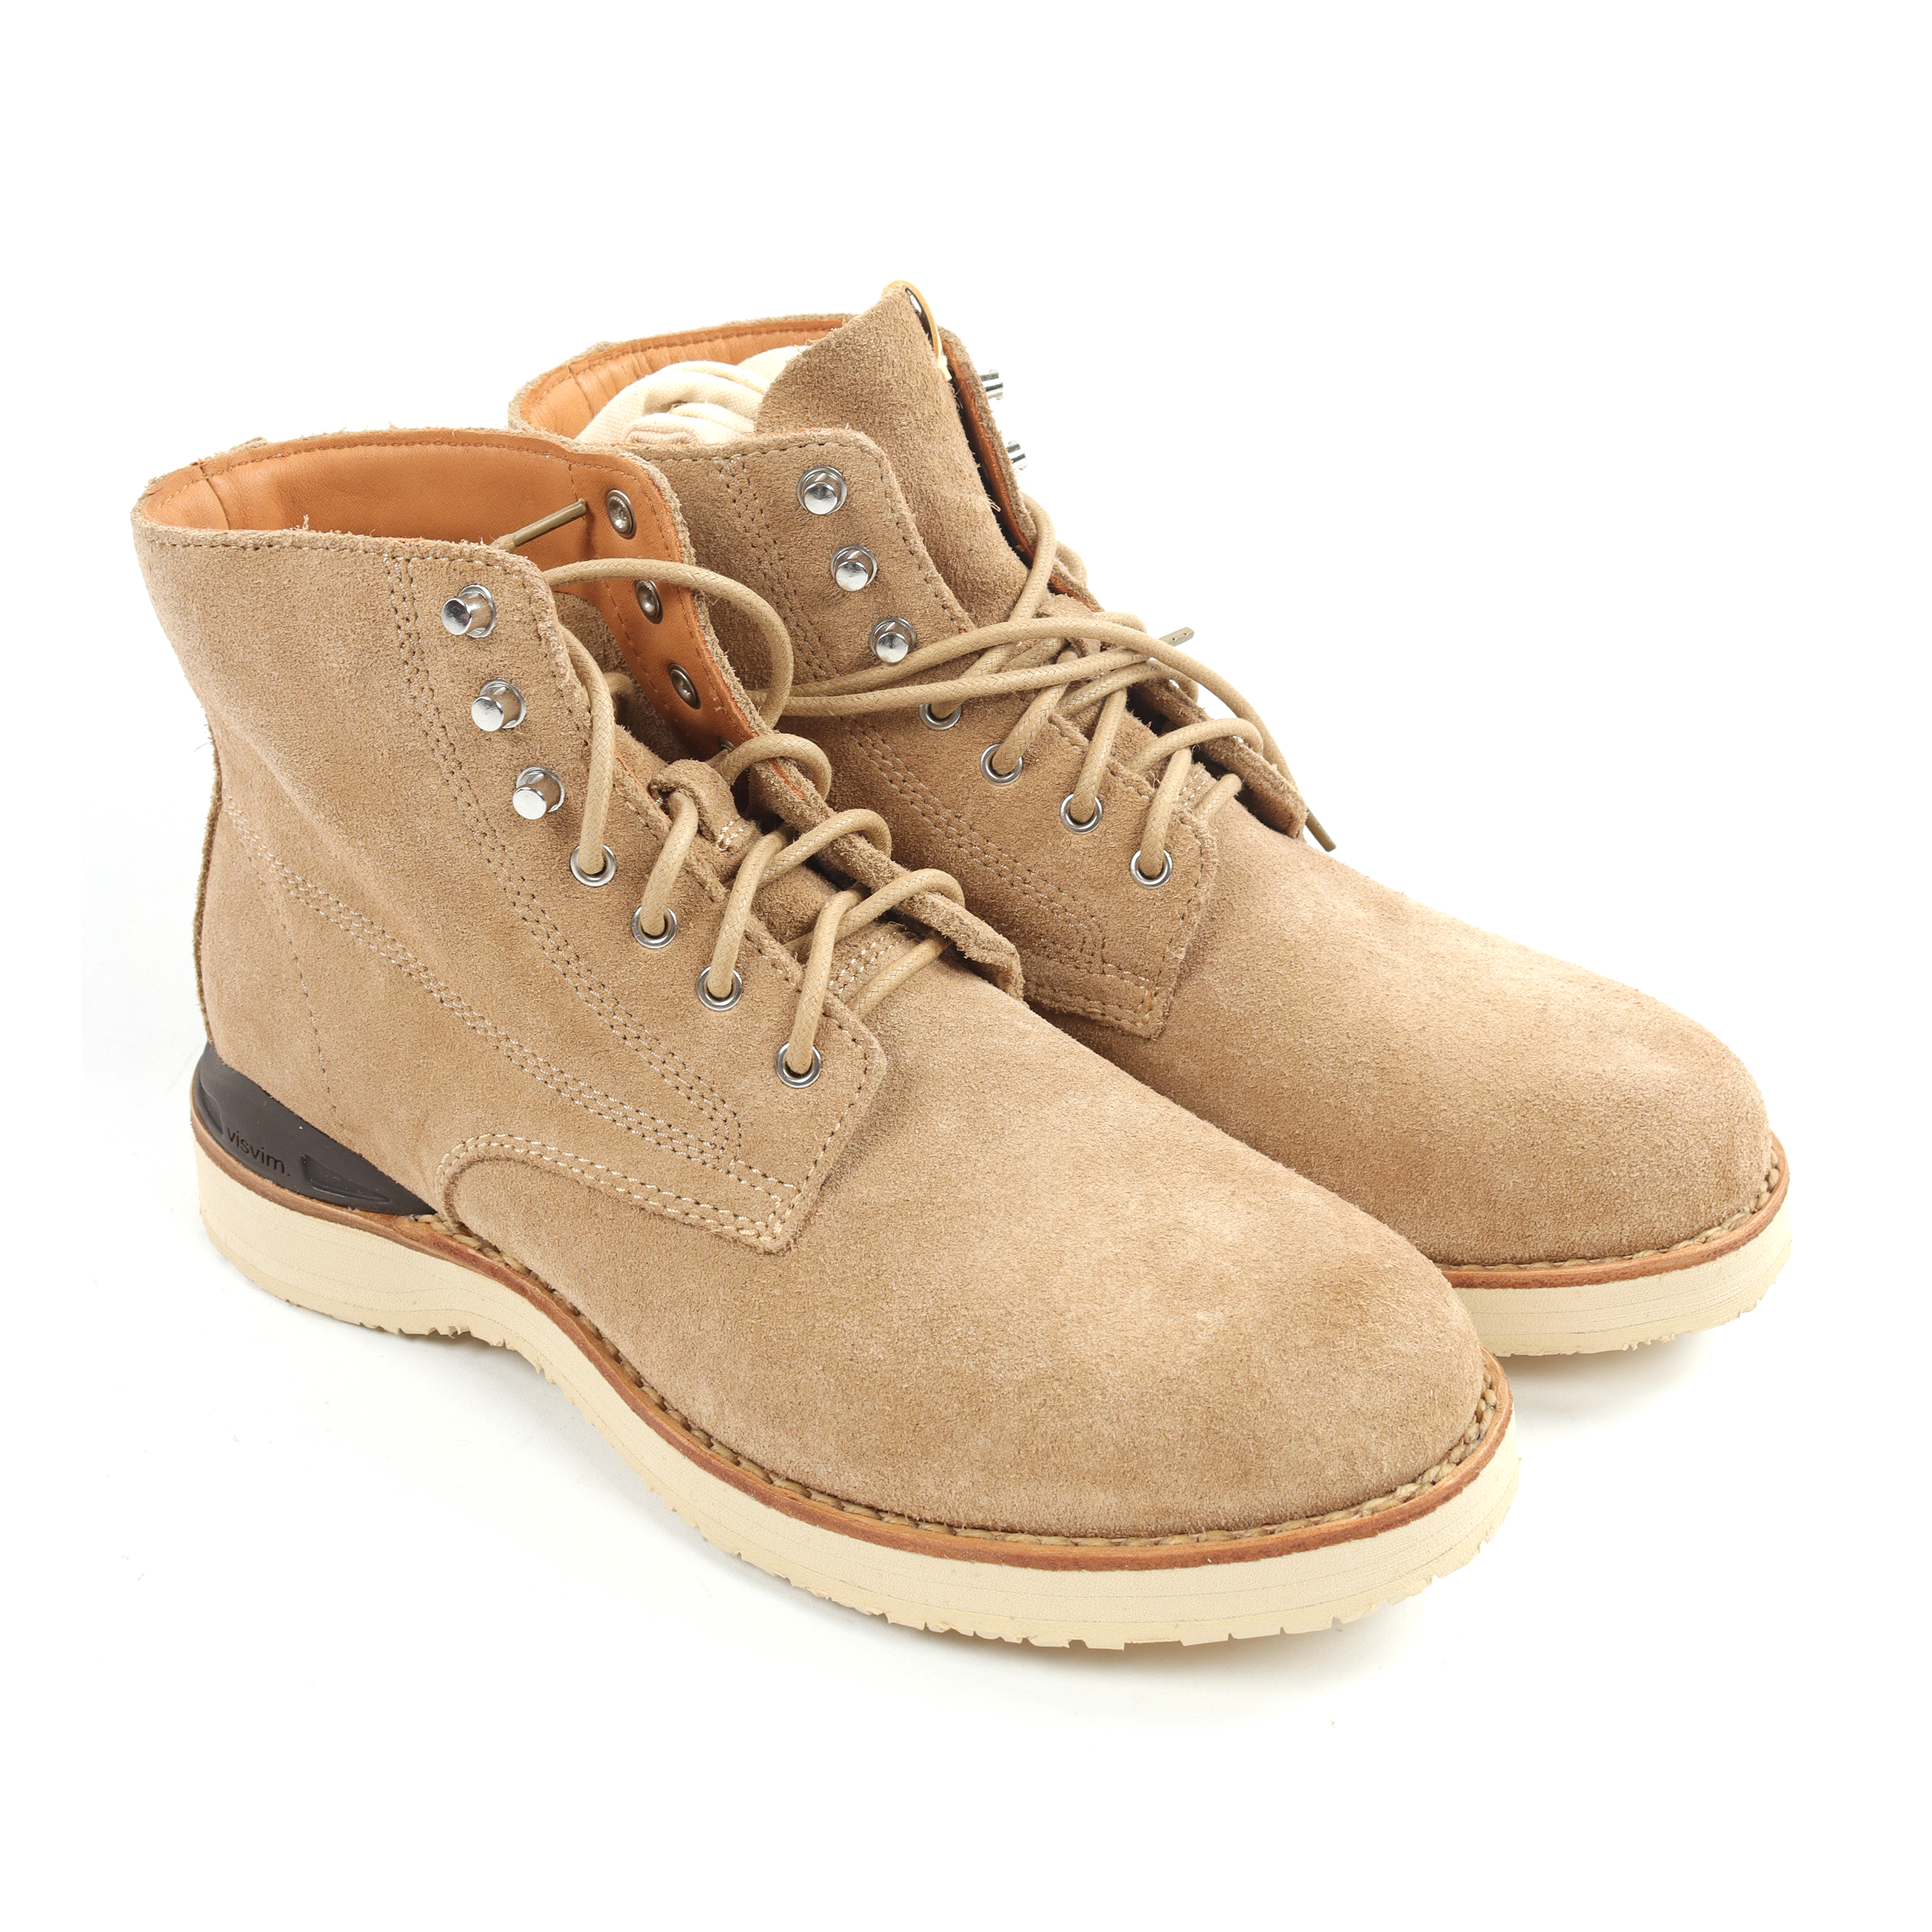 Virgil Suede Boot w/ Tags (Sand)